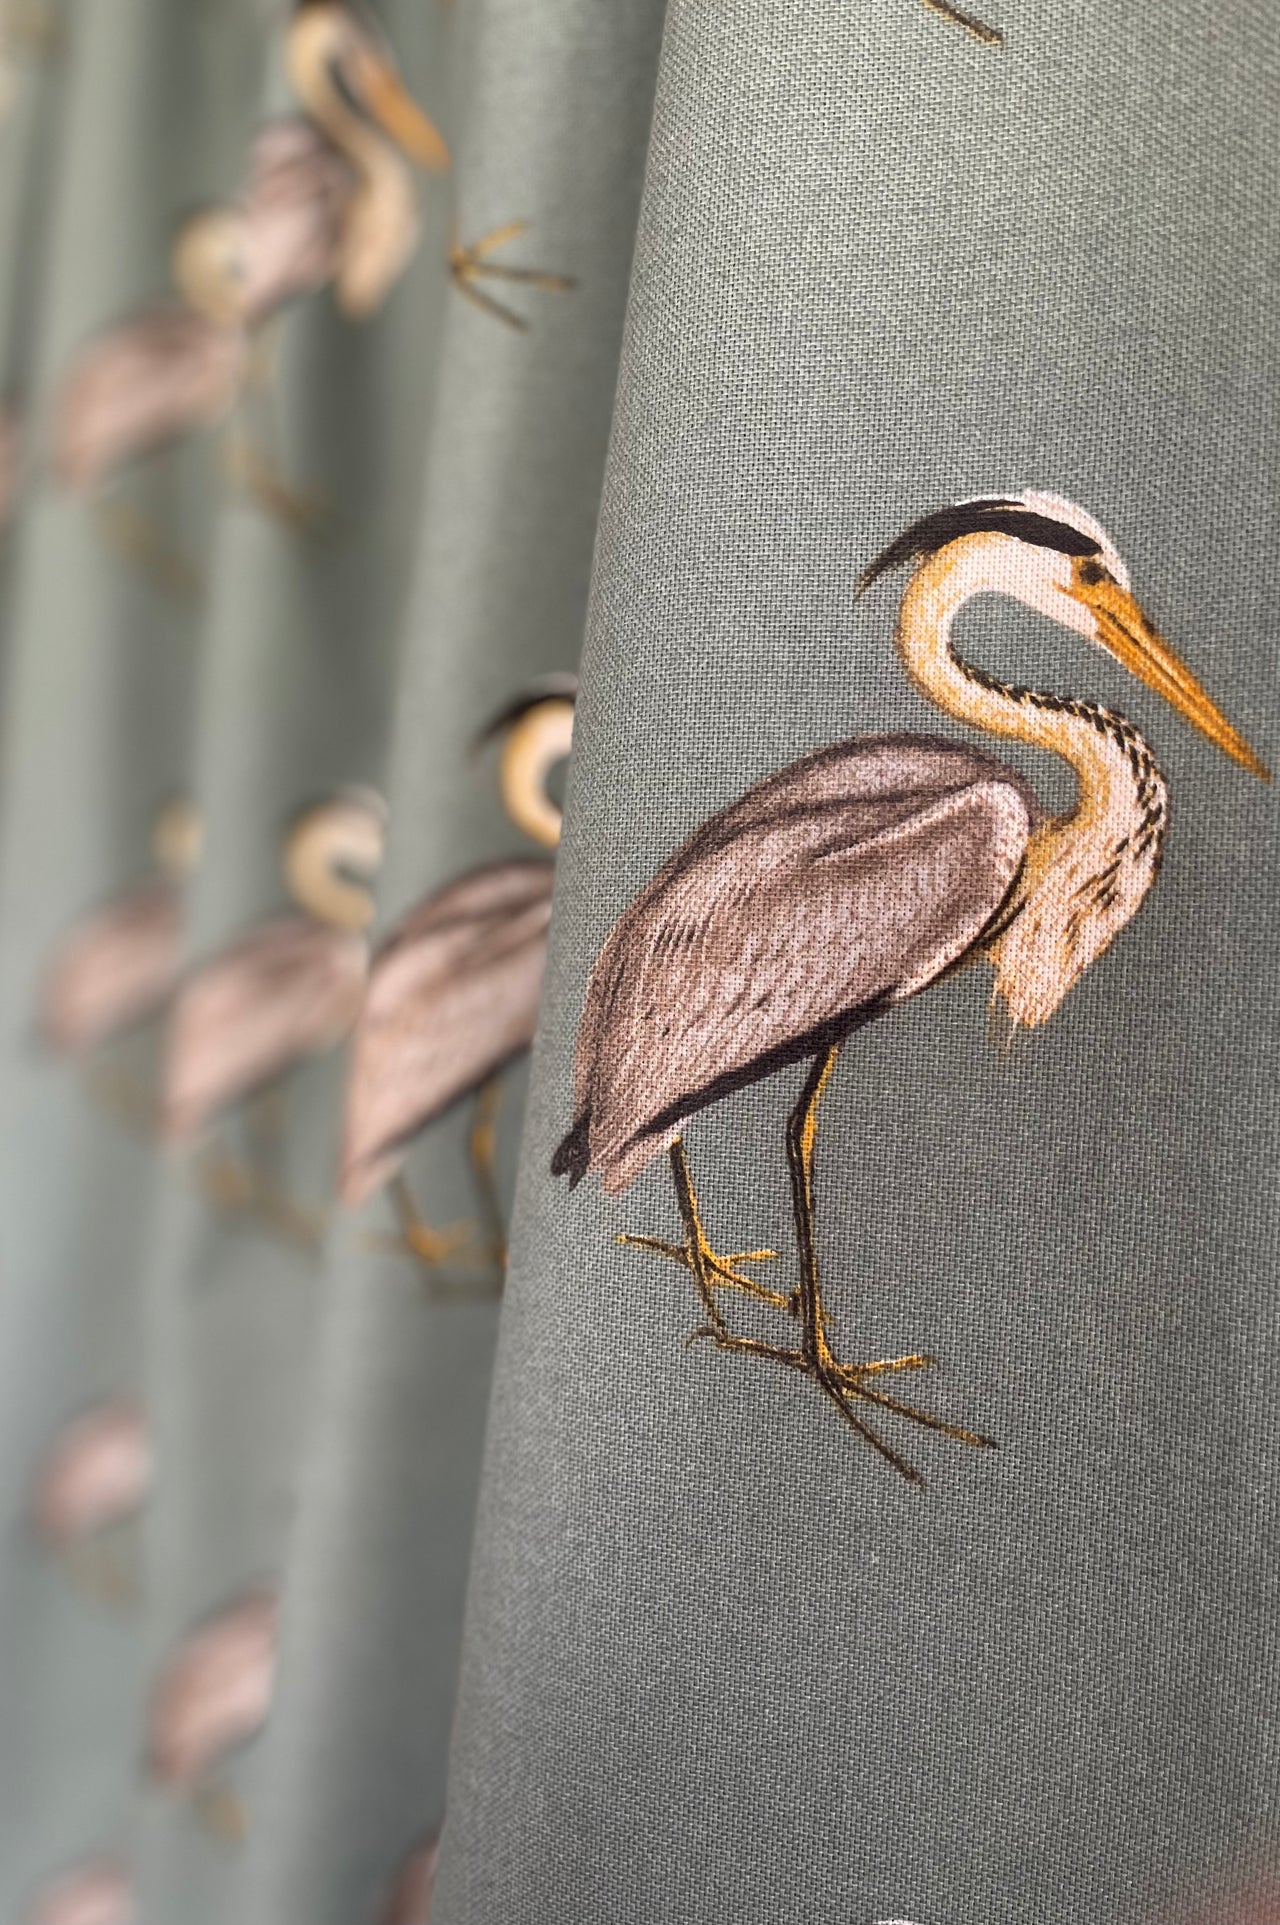 Herons Printed Cotton Fabric by The Meter Grey Sewing Material Birds Textile